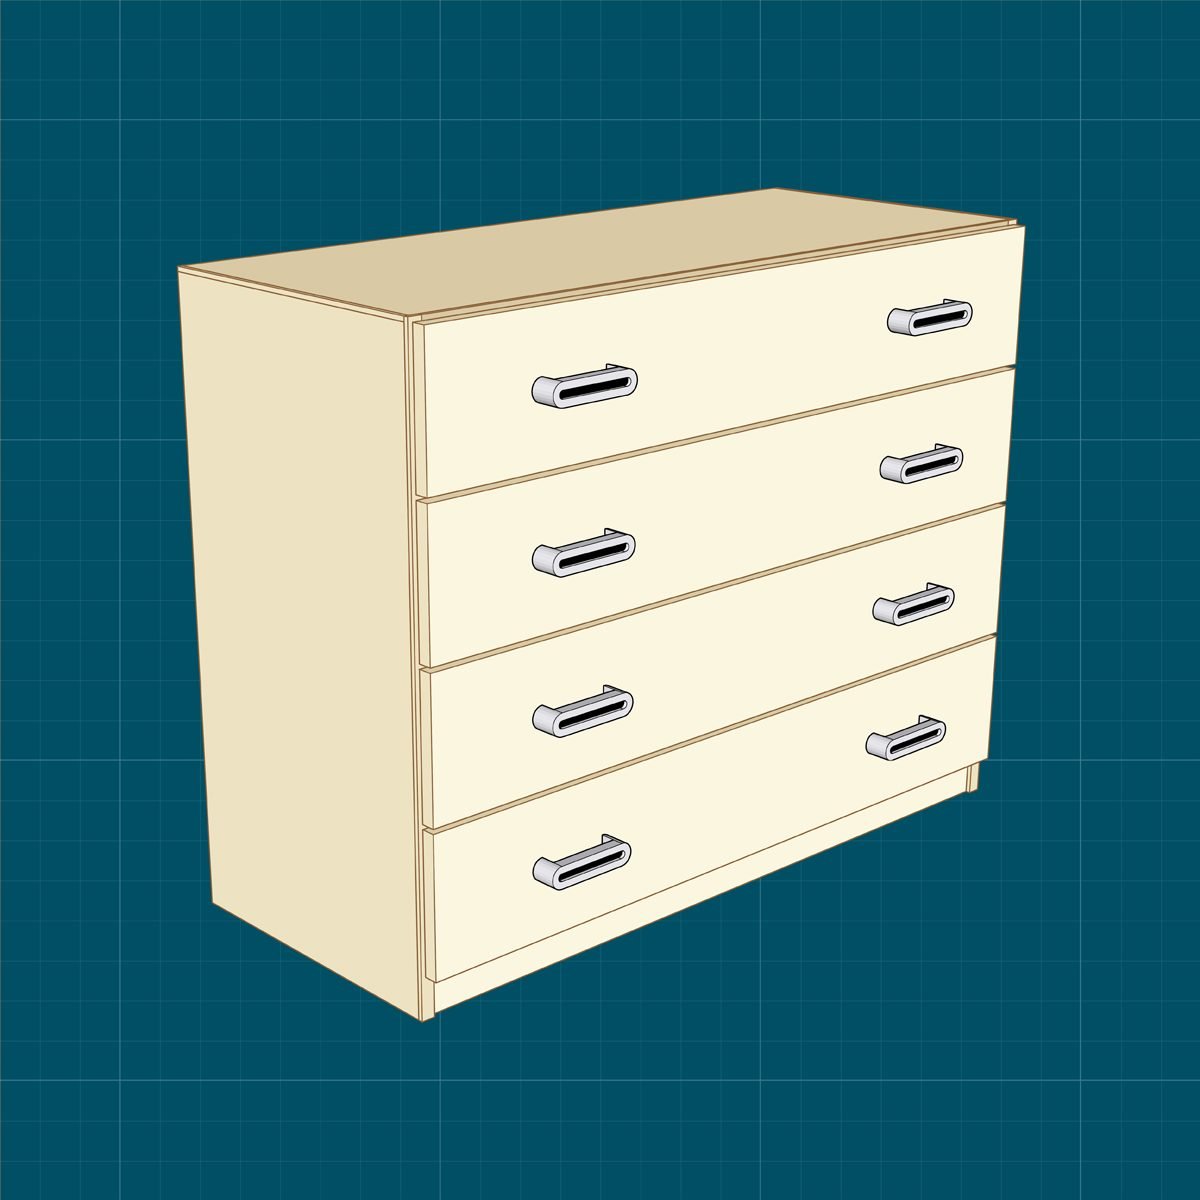 How to Build a Simple Dresser